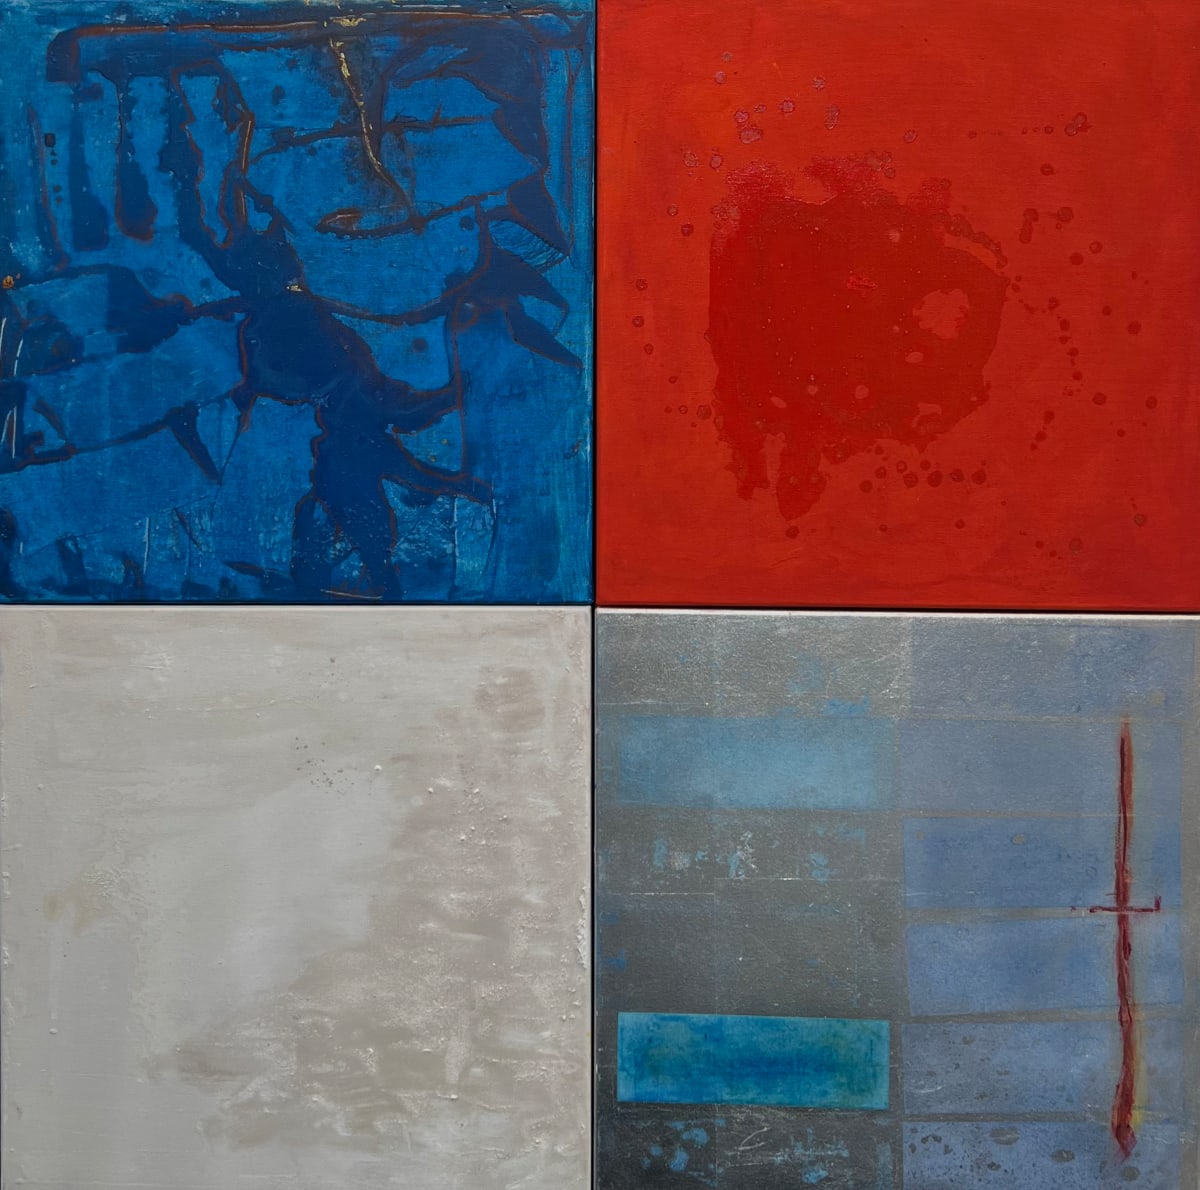 BLUE TRACES, WARM RED, WHITE FIELD AND SILVER WITH BLUE RECTANGLES by Maria Cerro 